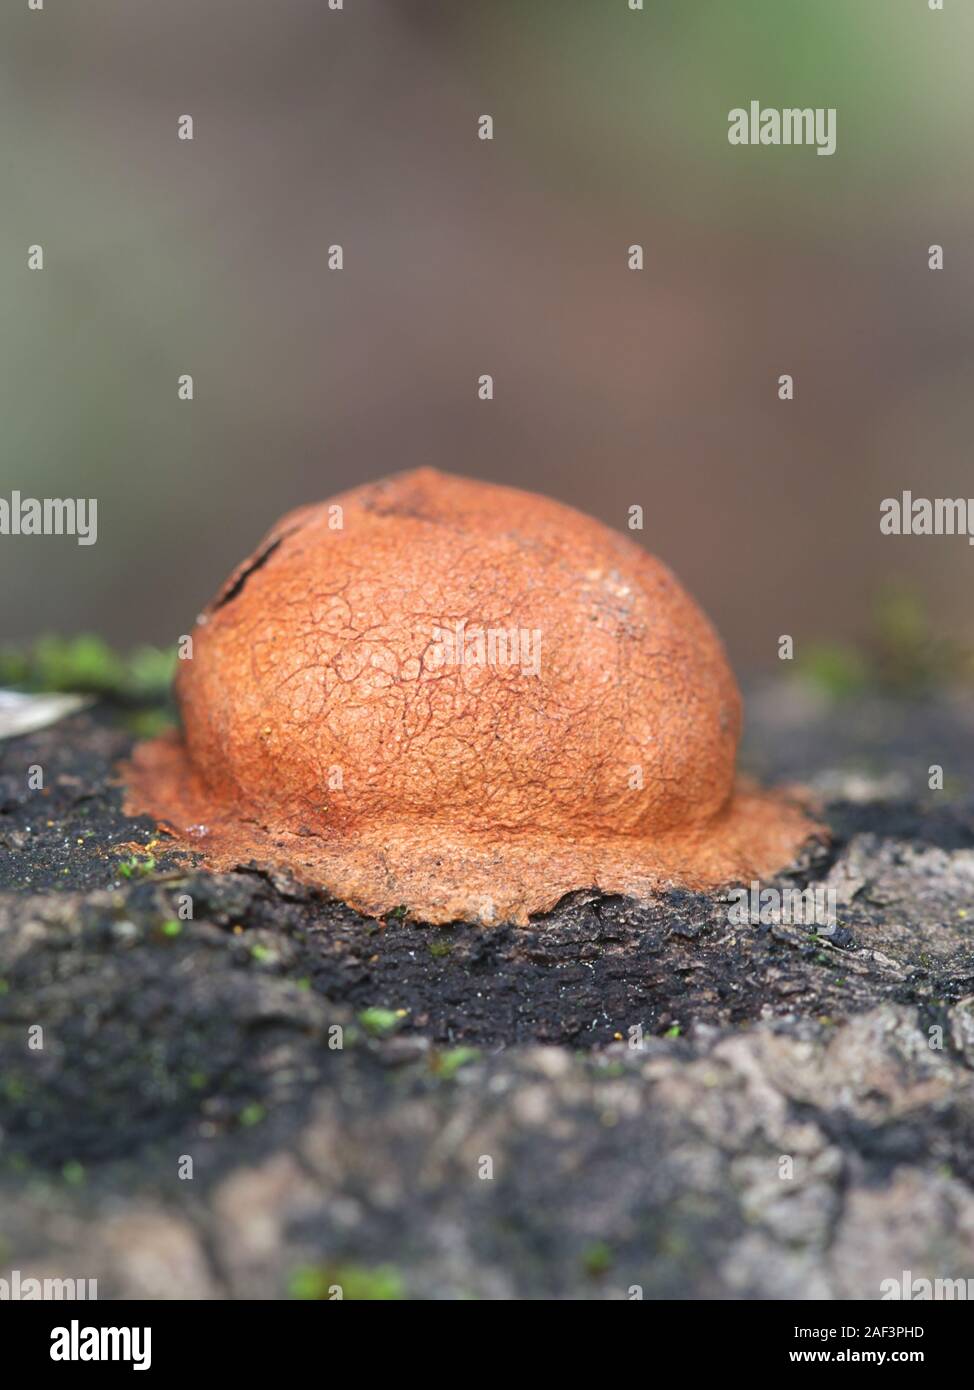 Fuligo leviderma, a plasmodial slime mold or moulds from Finland Stock Photo